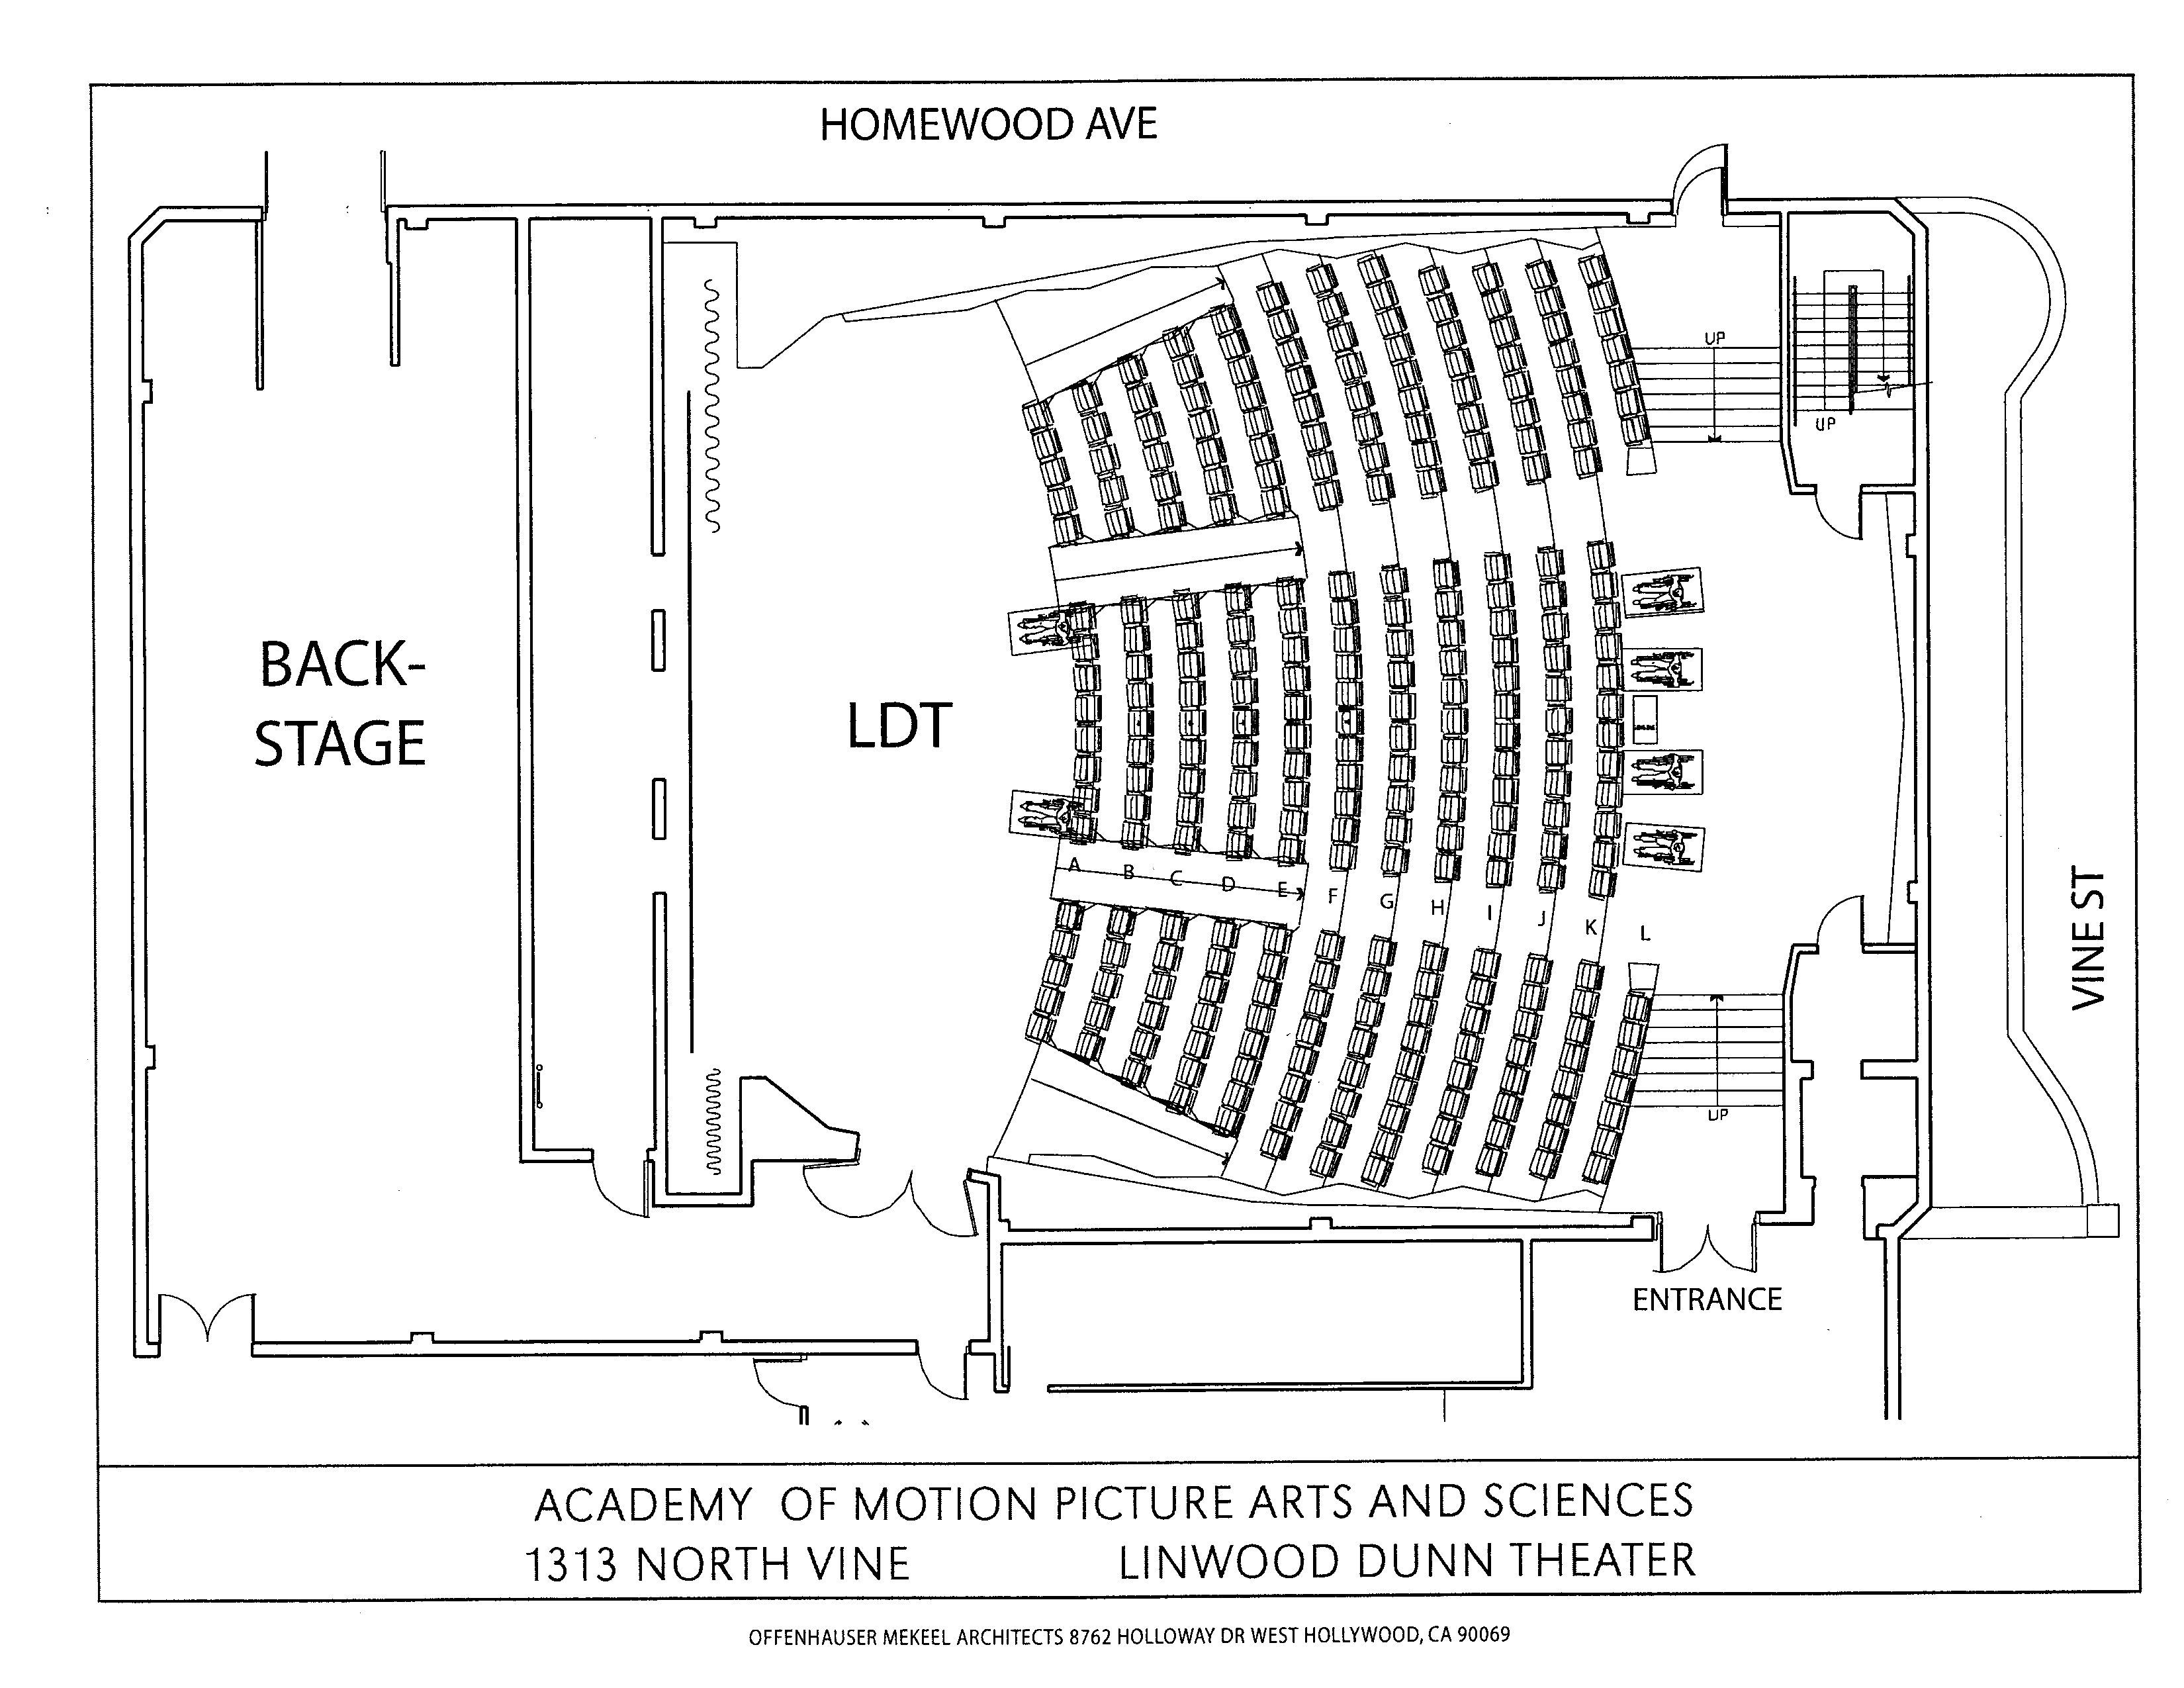 LINWOOD DUNN THEATER Theater plan, Building plan drawing